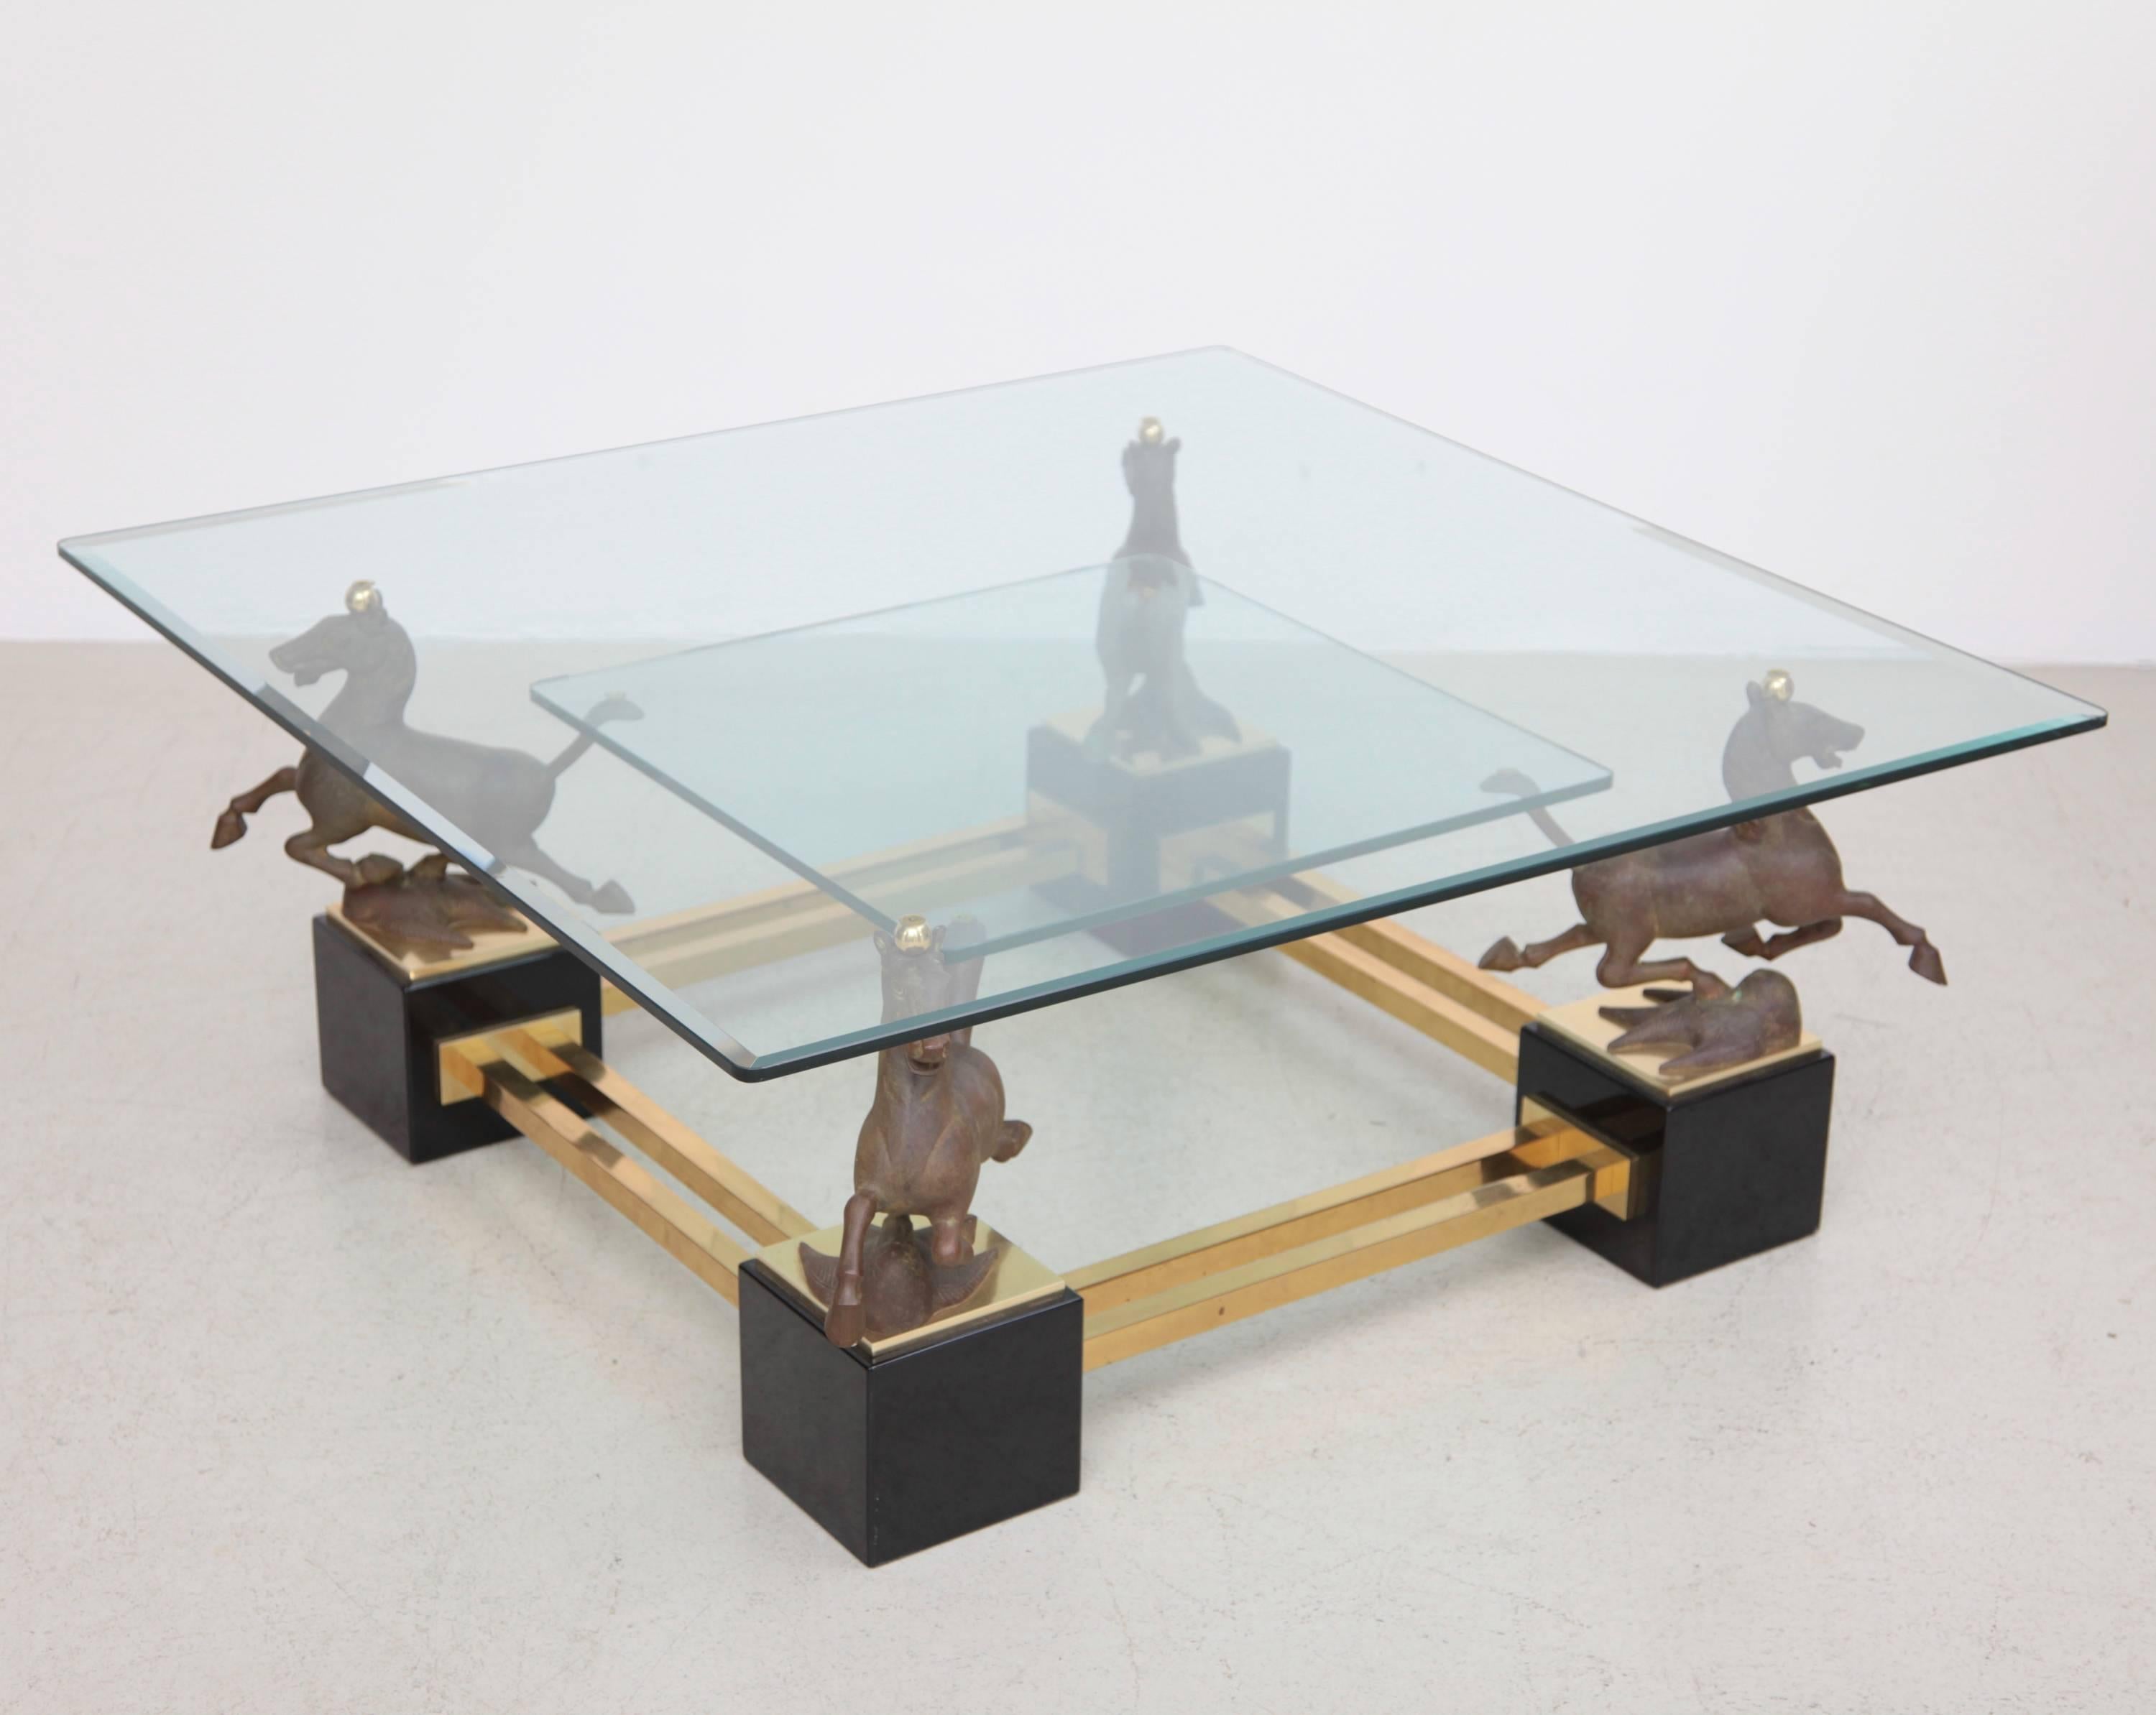 Very nice and huge square-shape coffee table with four flying horses of Gansu. The two level table is produced in the 1970s by high end manufacturer Maison Charles. Glass has one small chip on the corner.